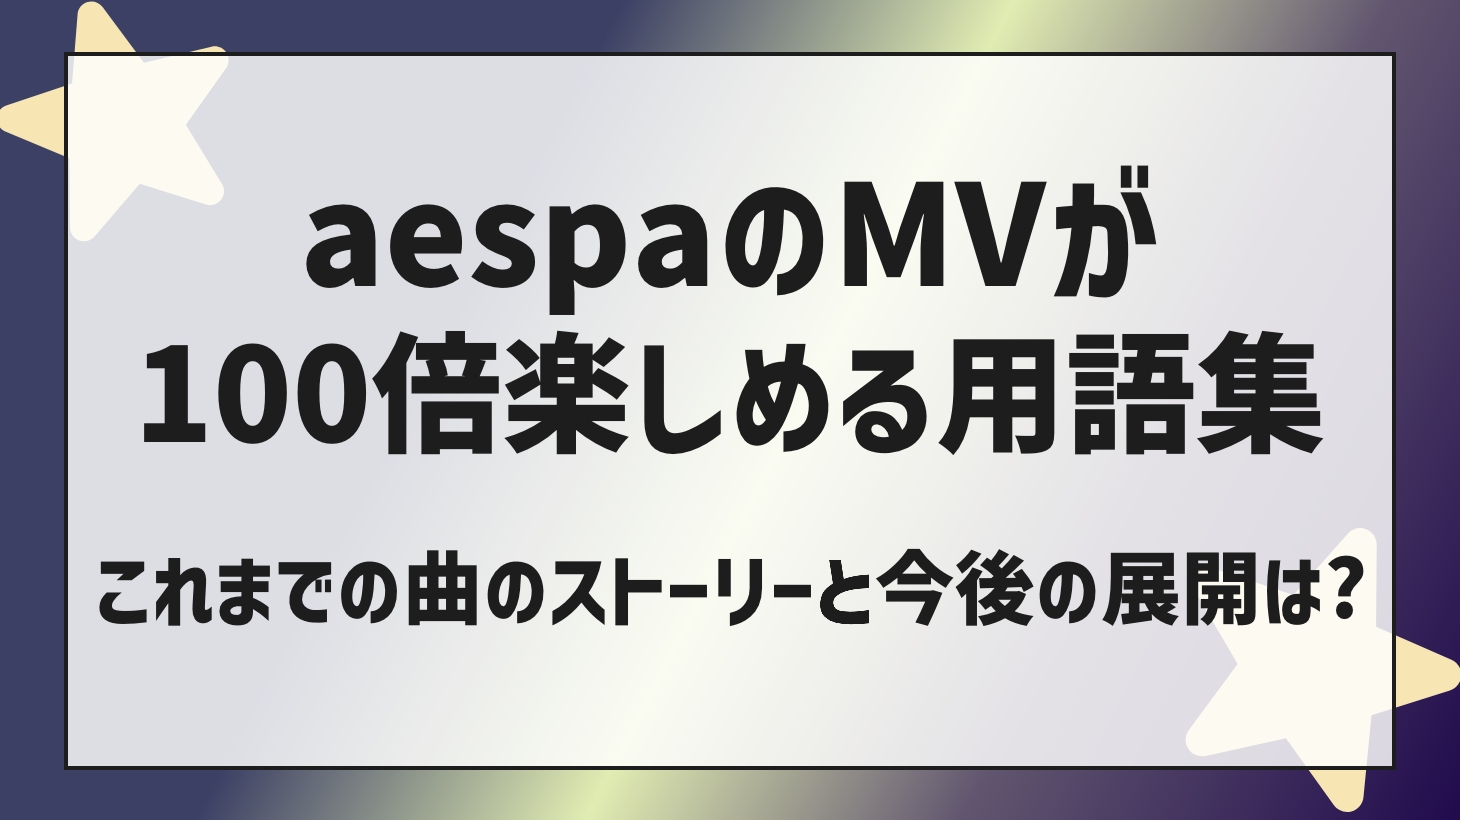 If you understand aespa terms, you can enjoy MV 100 times more! Consideration and story commentary!